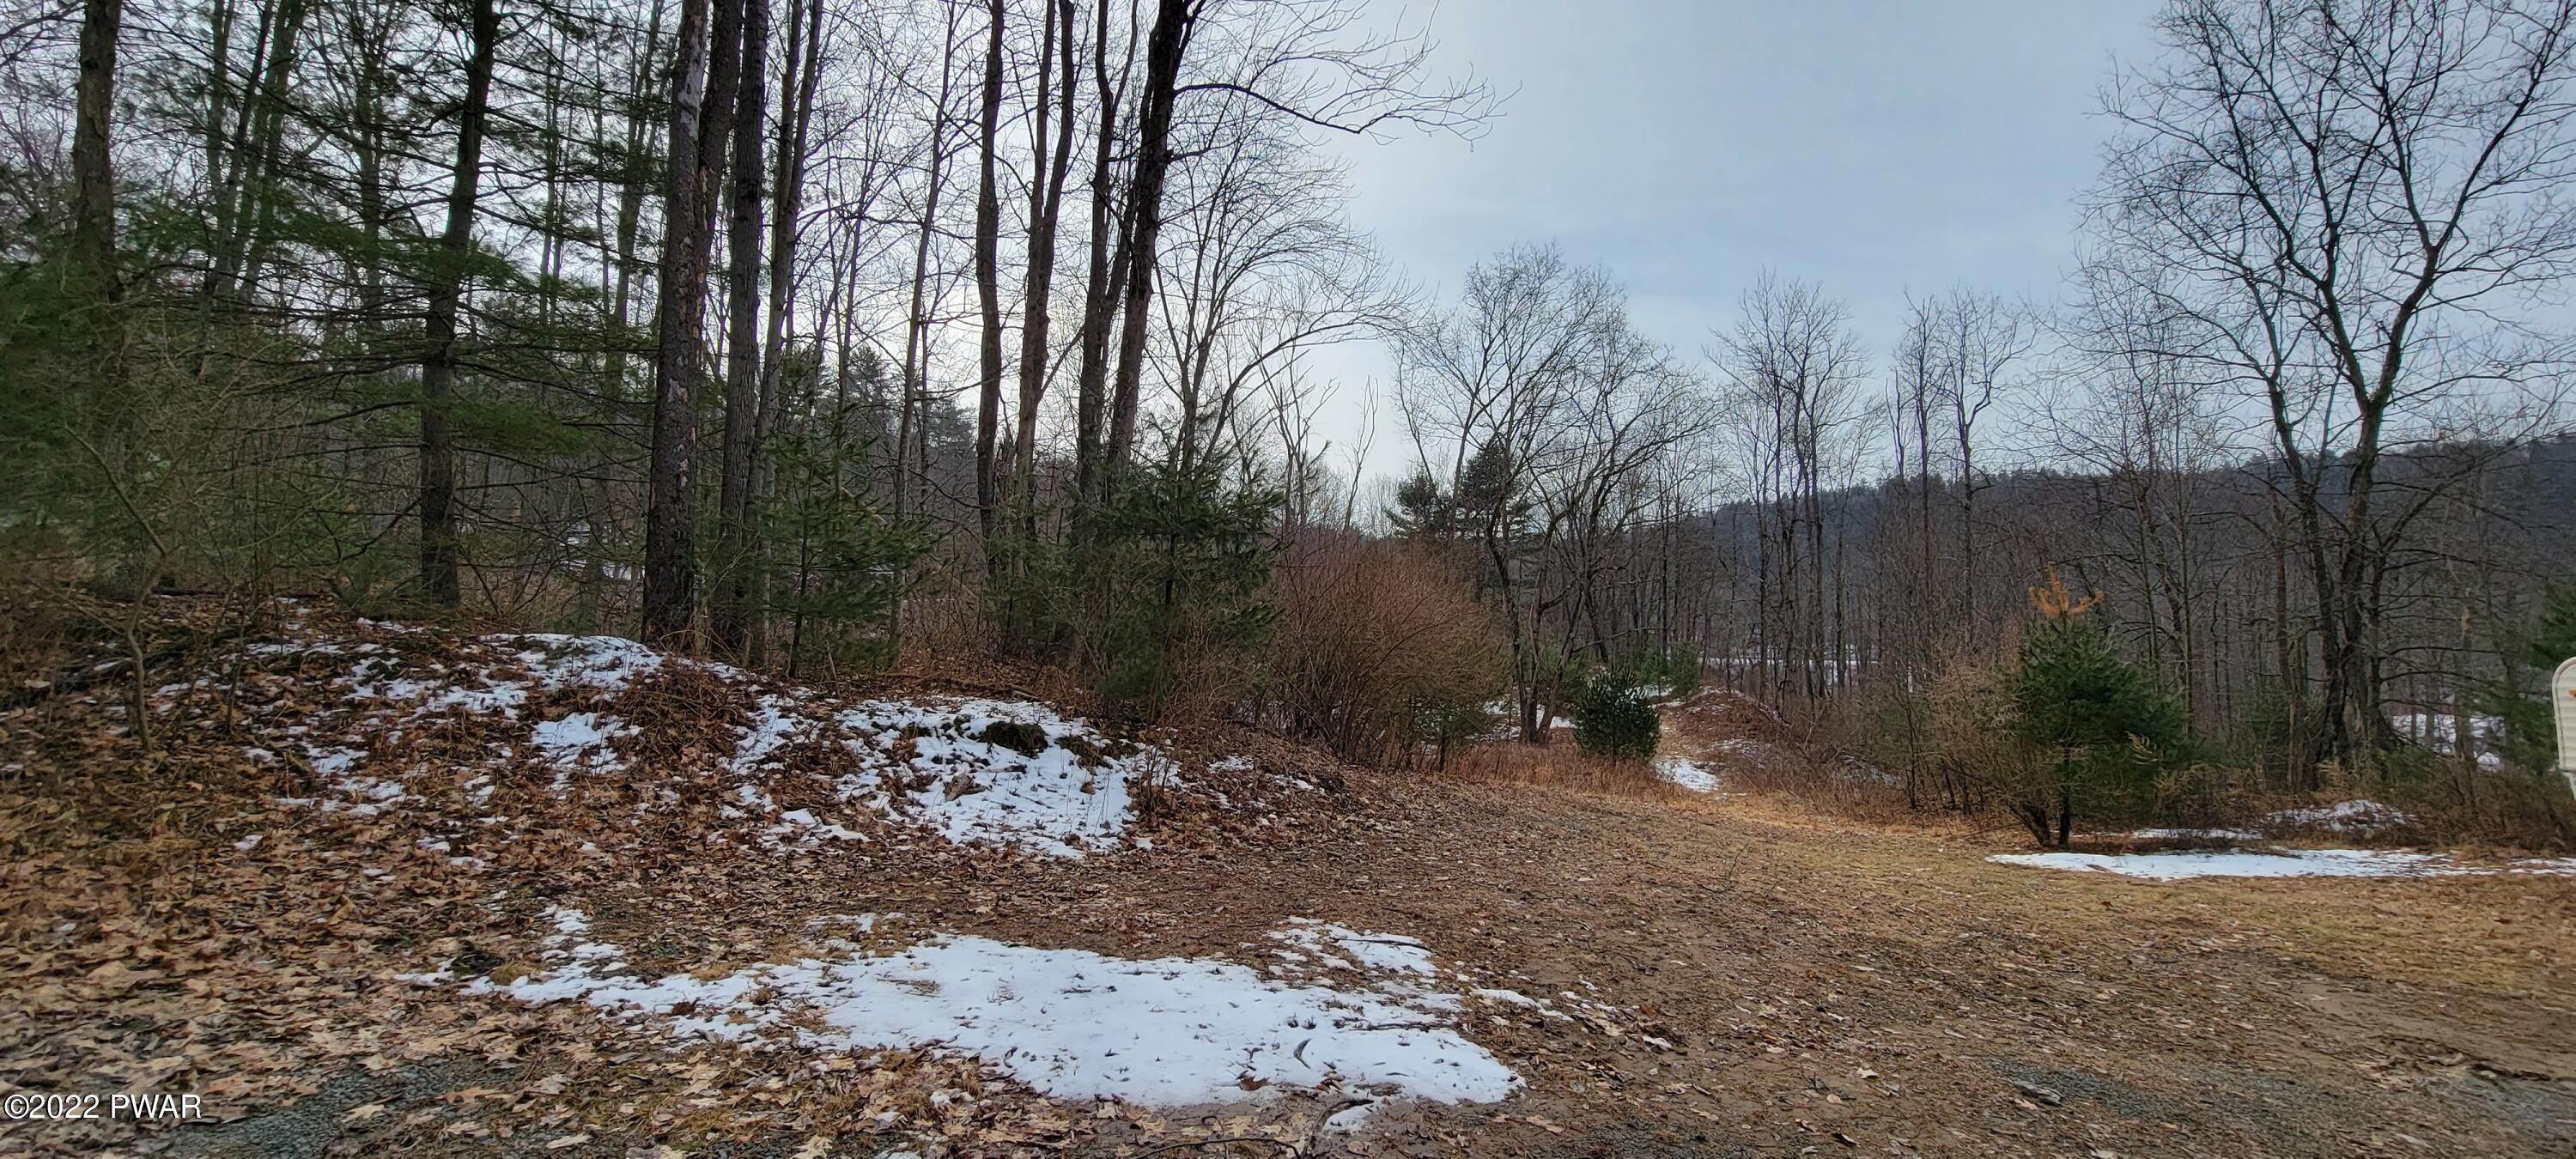 18. Land for Sale at Lot 5.2 Humphrey Rd Narrowsburg, New York 12764 United States